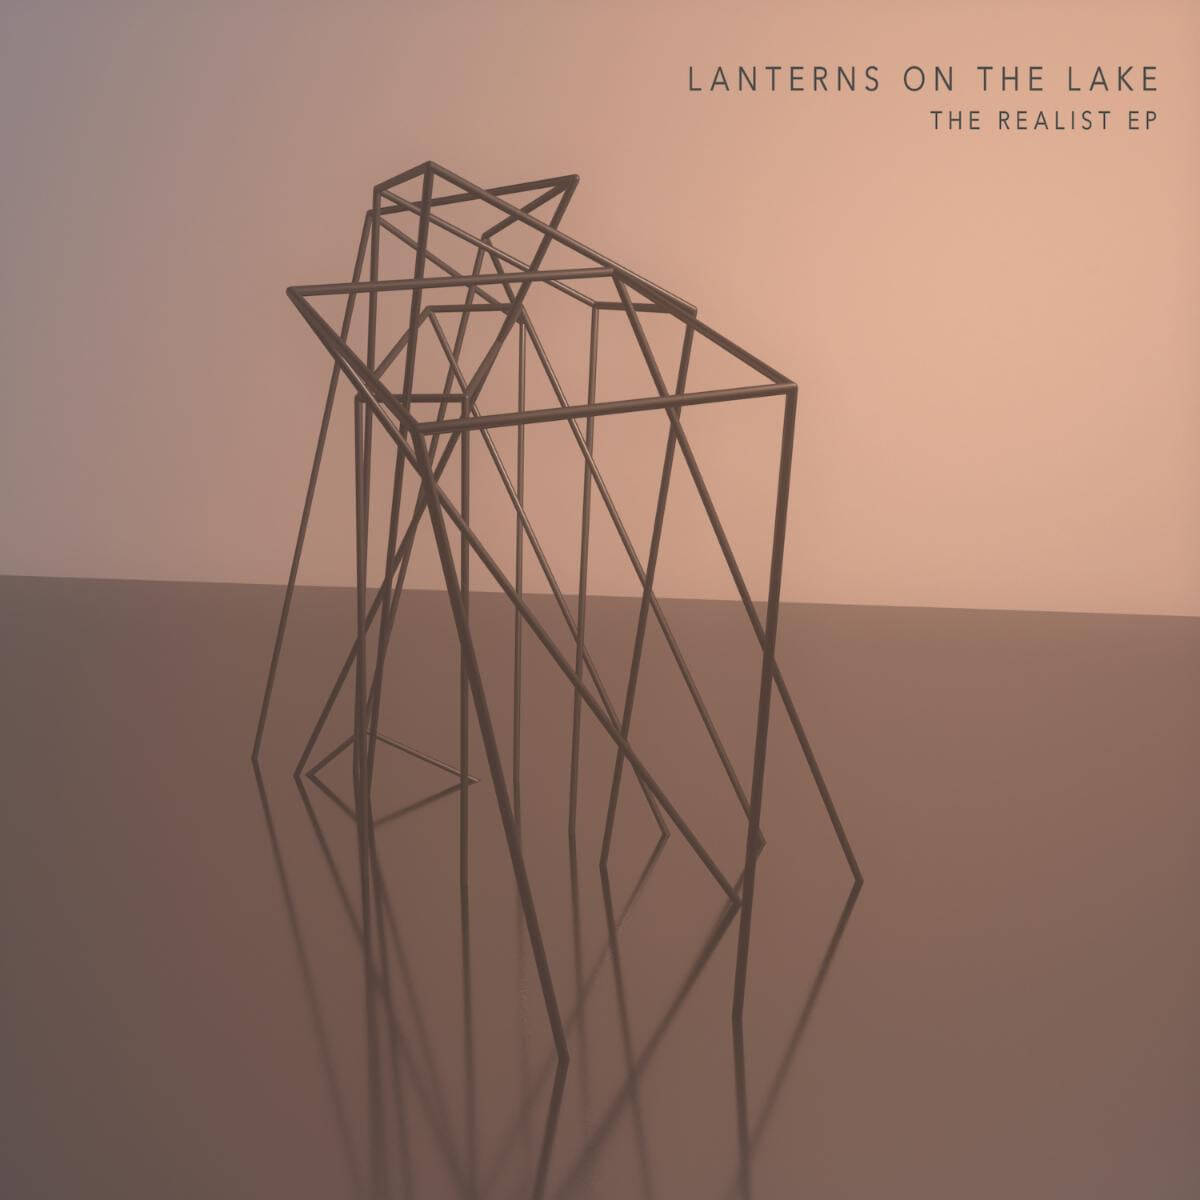 The "Realist" by Lanterns On The Lake is Northern Transmissions Song of the Day